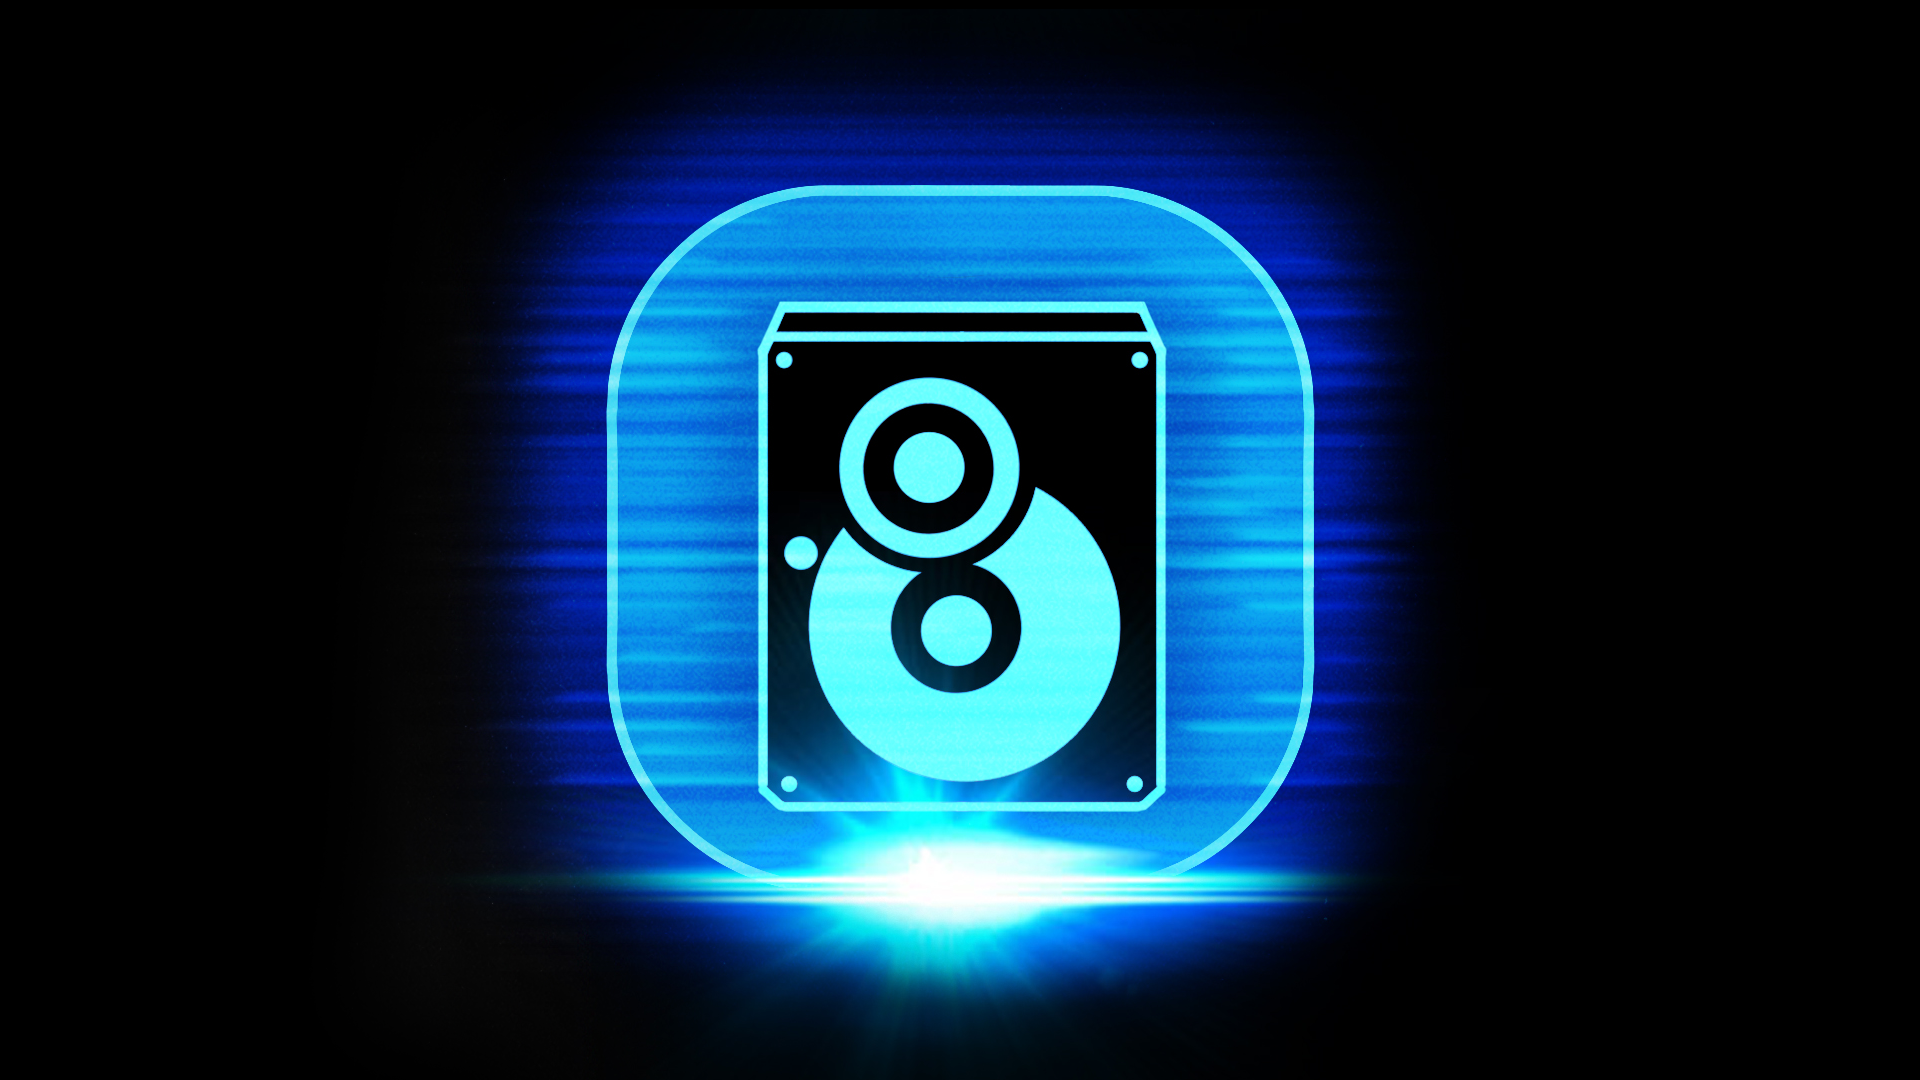 Icon for Data Collector